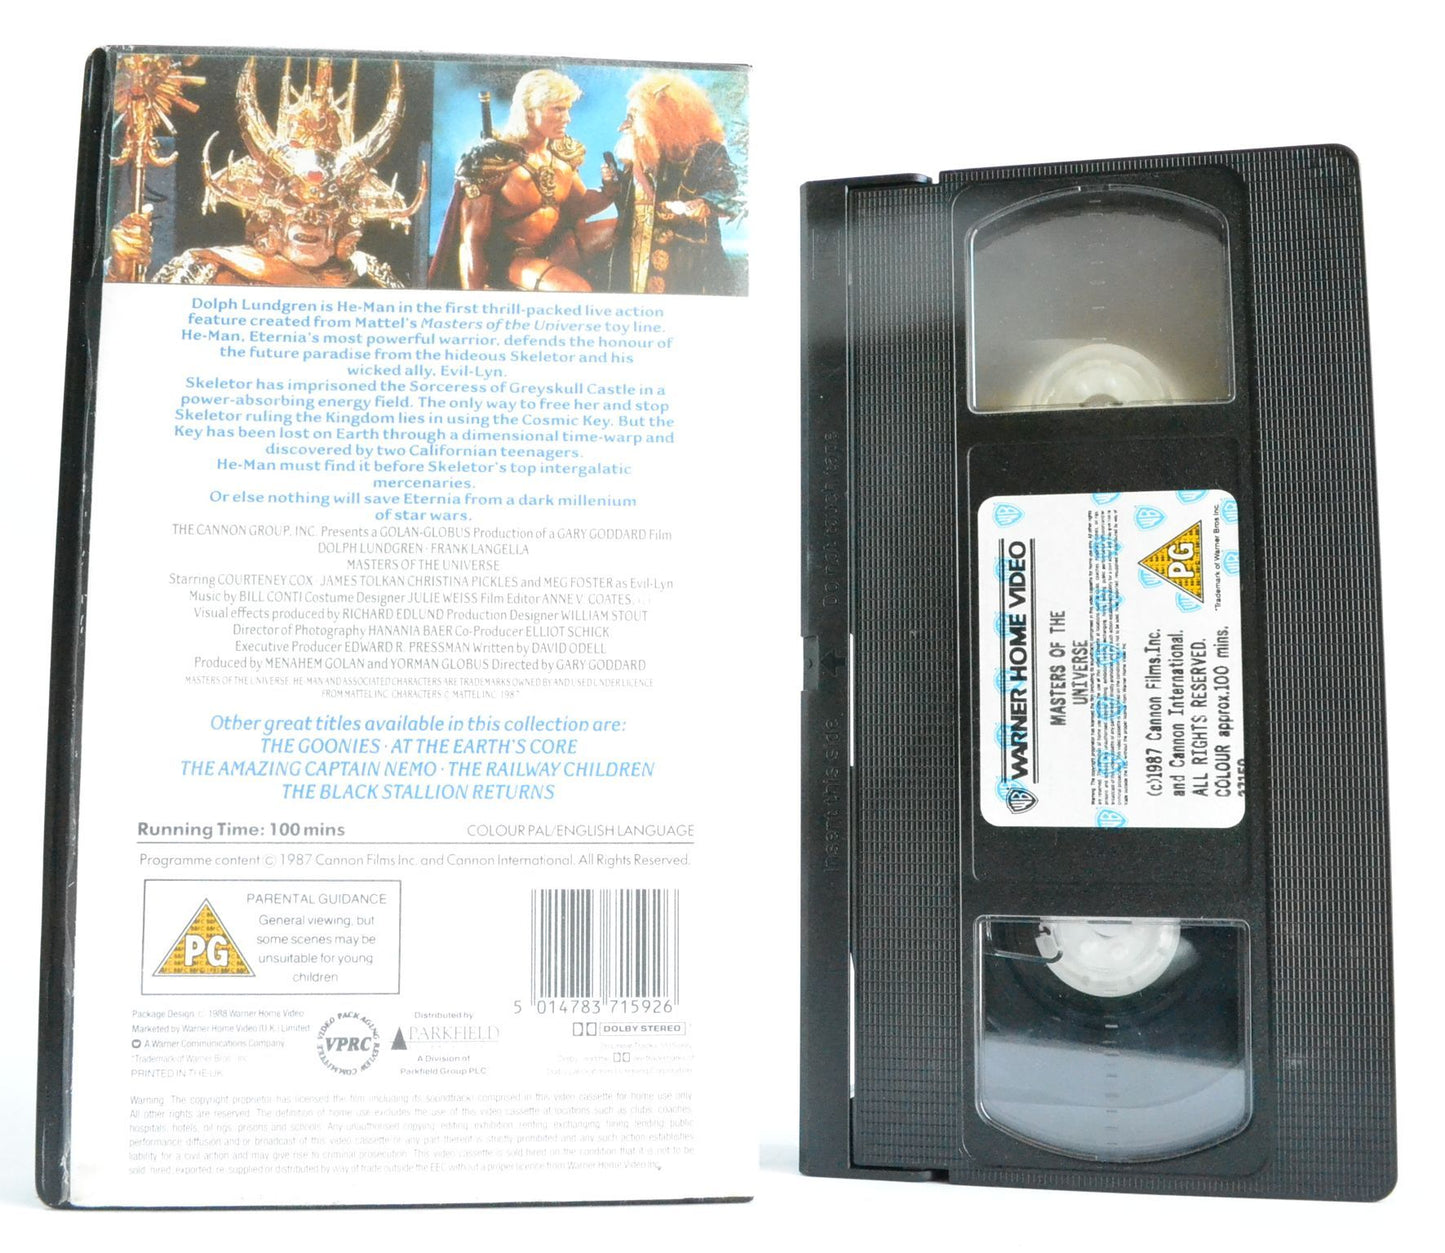 Masters Of The Universe: Dolph Lundgren Is He-Man (1987) Action Sci-Fi - Pal - VHS-